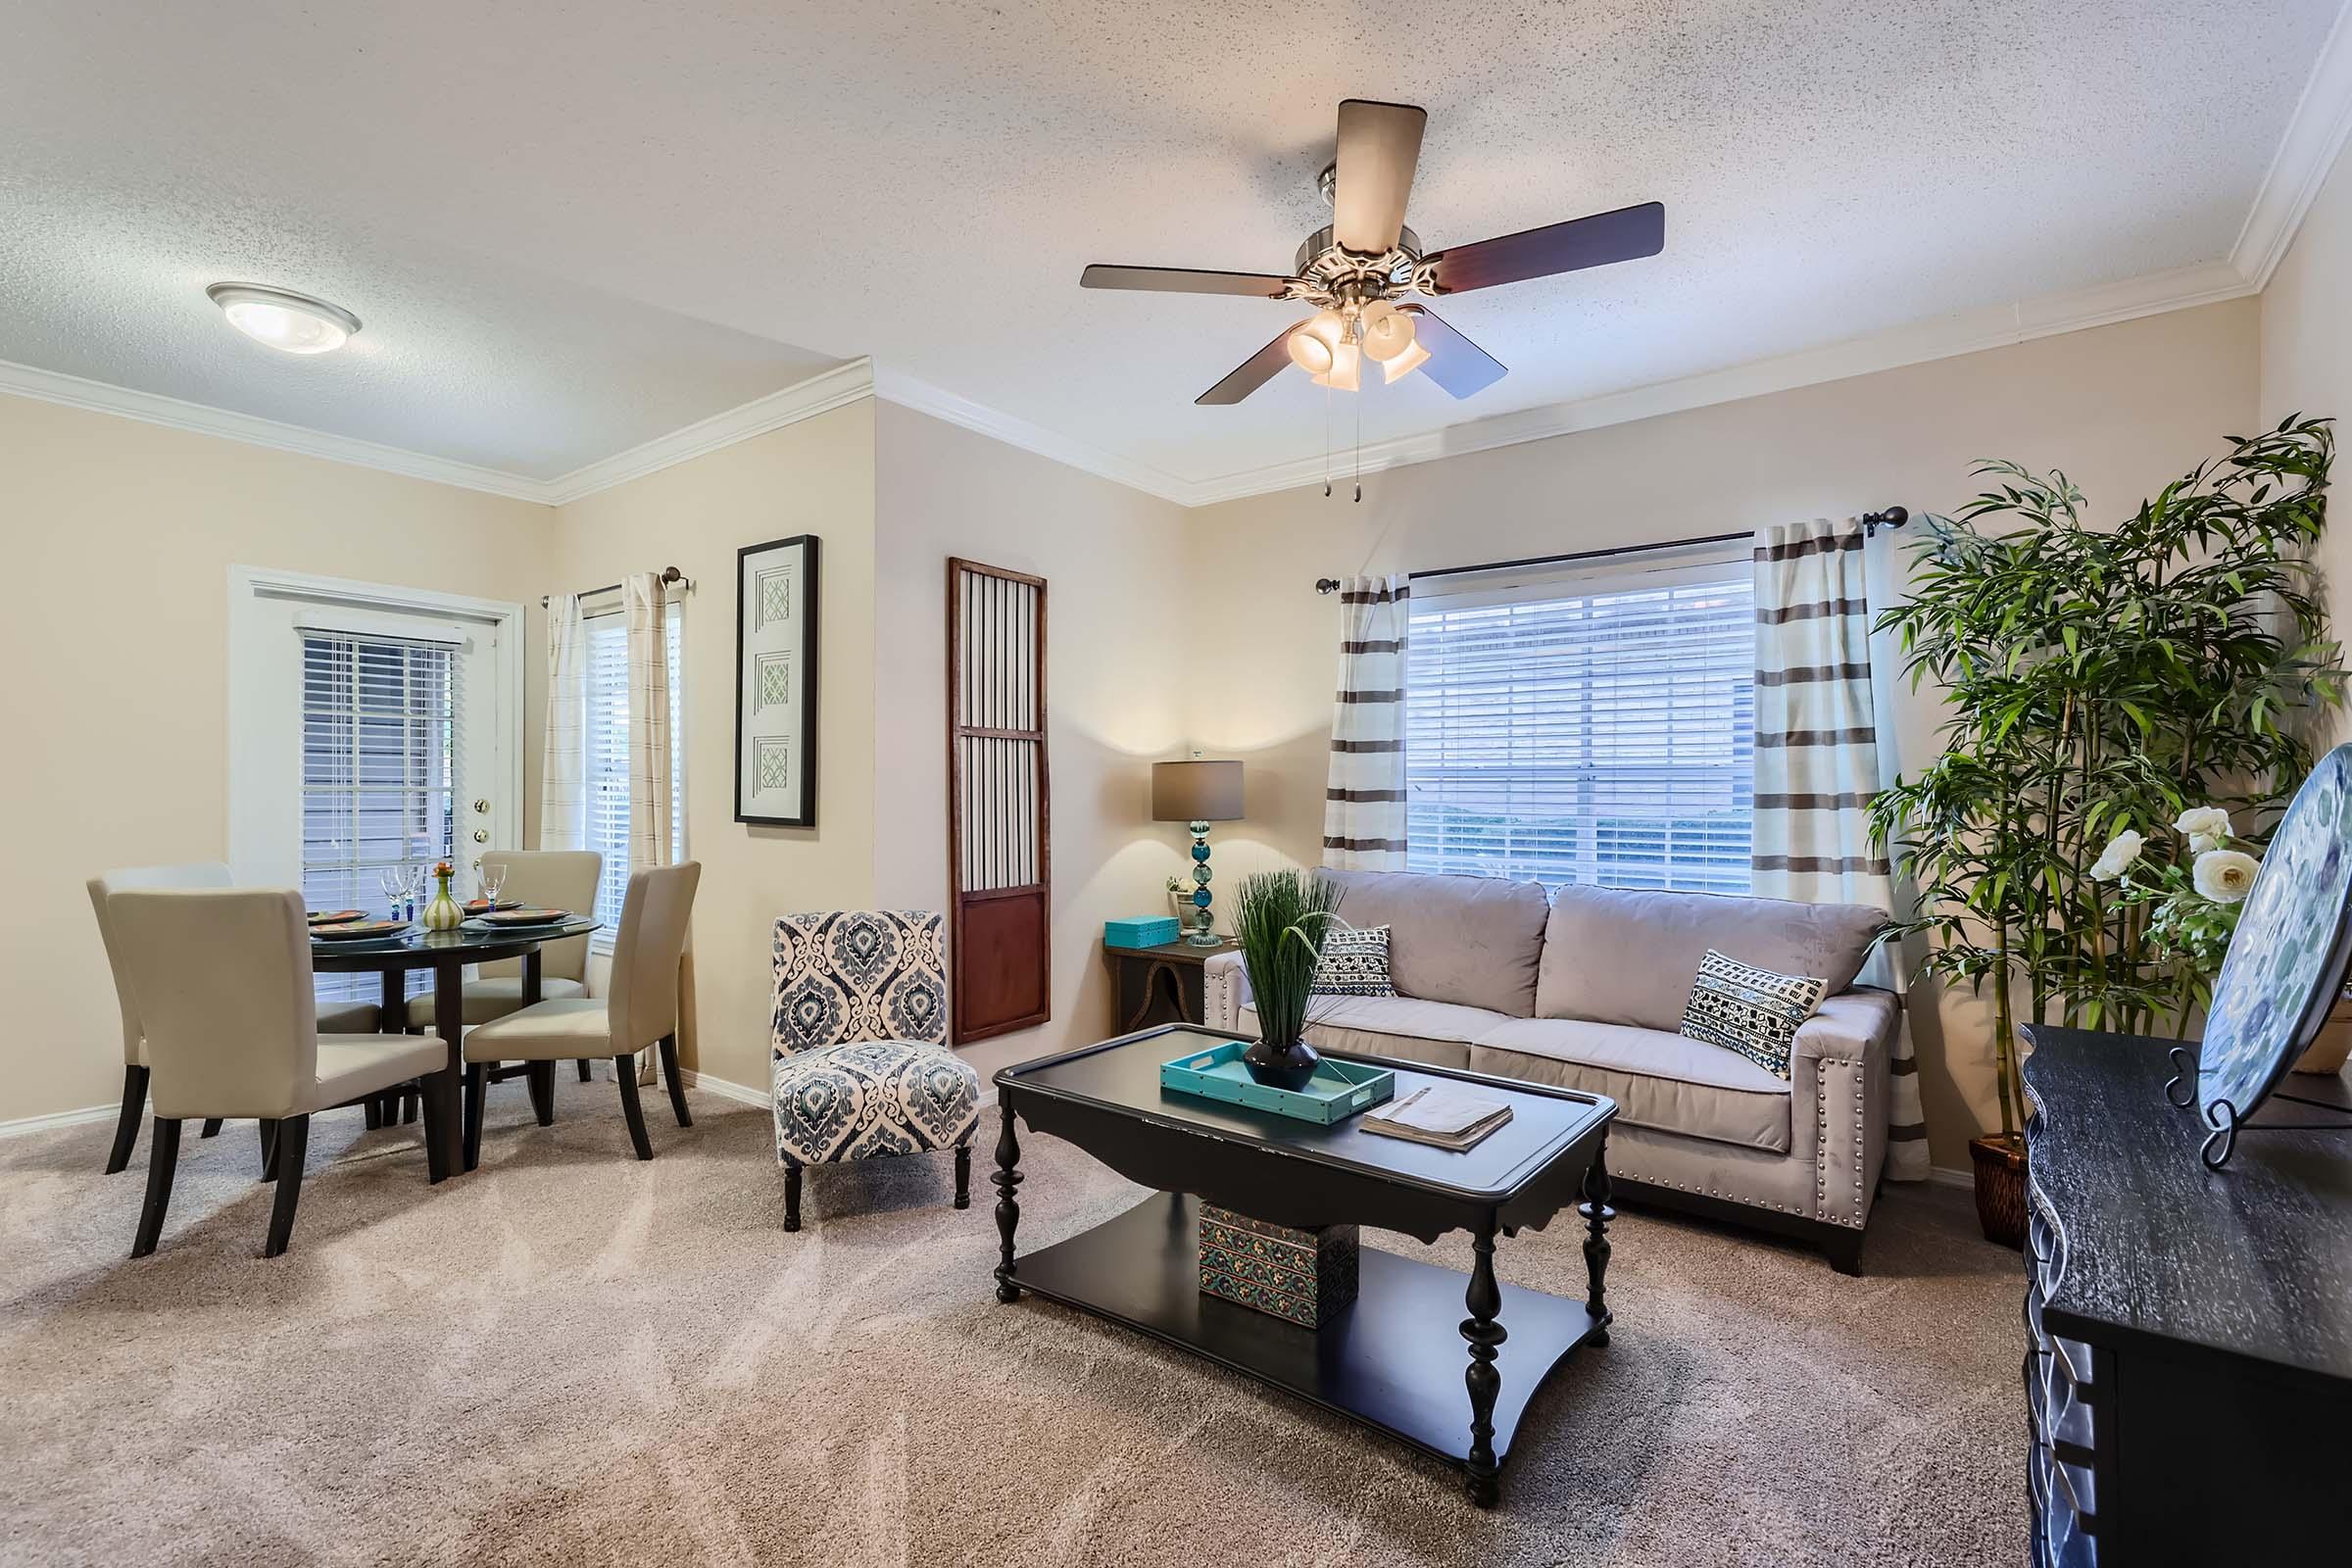 A model dining and living area at Rise skyline in Mesquite, TX.